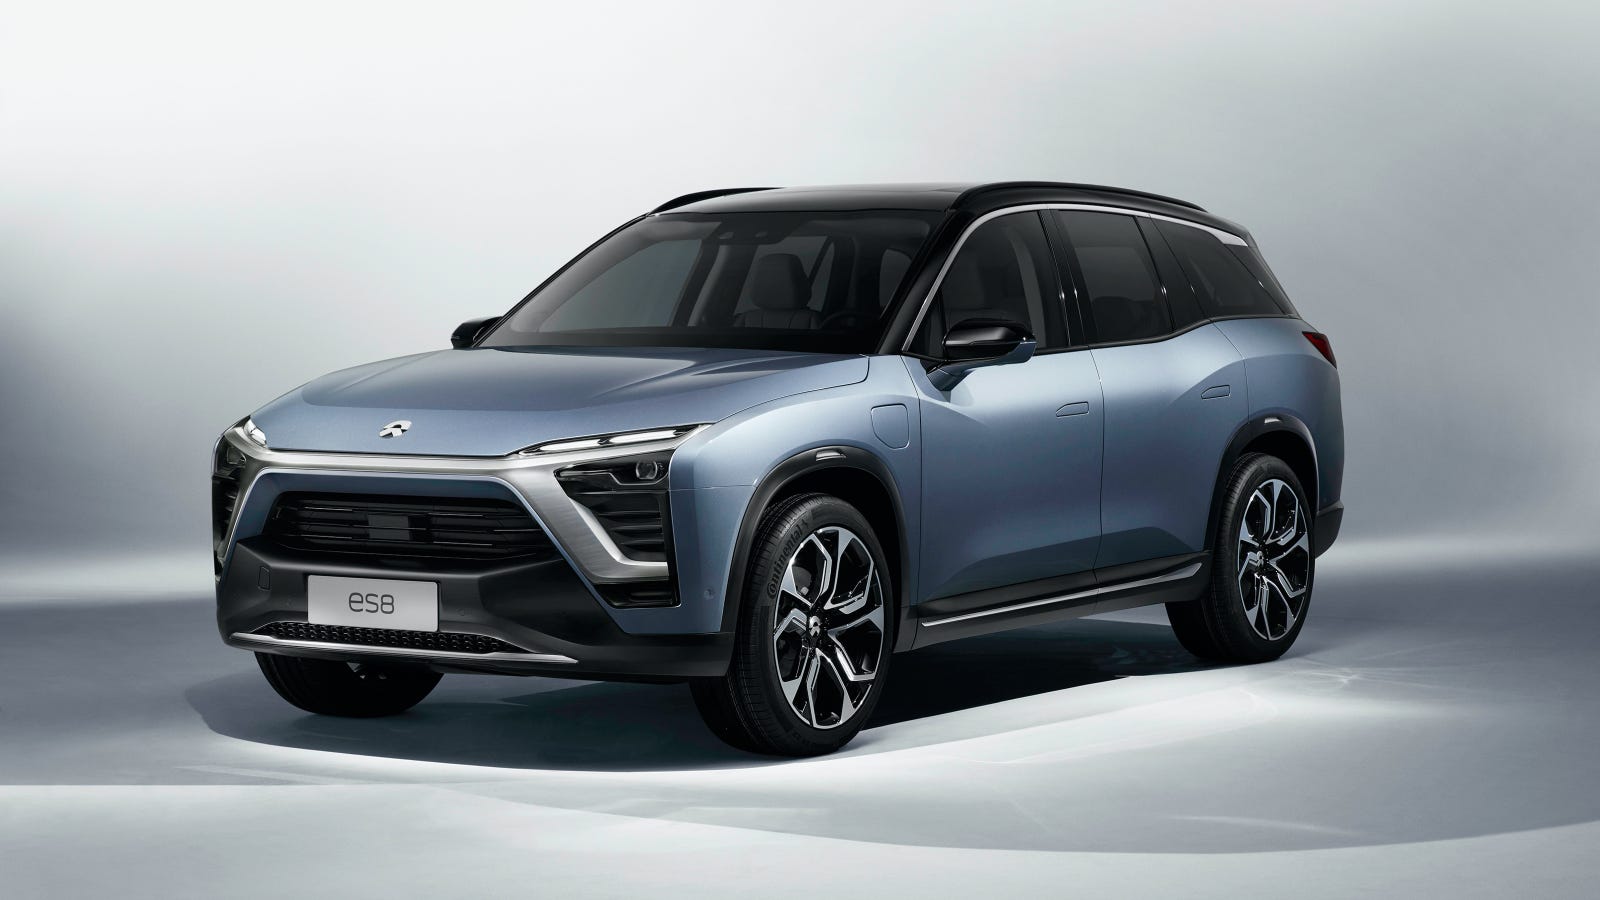 Electric Startup NIO Wants To Sell A ThreeRow SUV In China Next Year